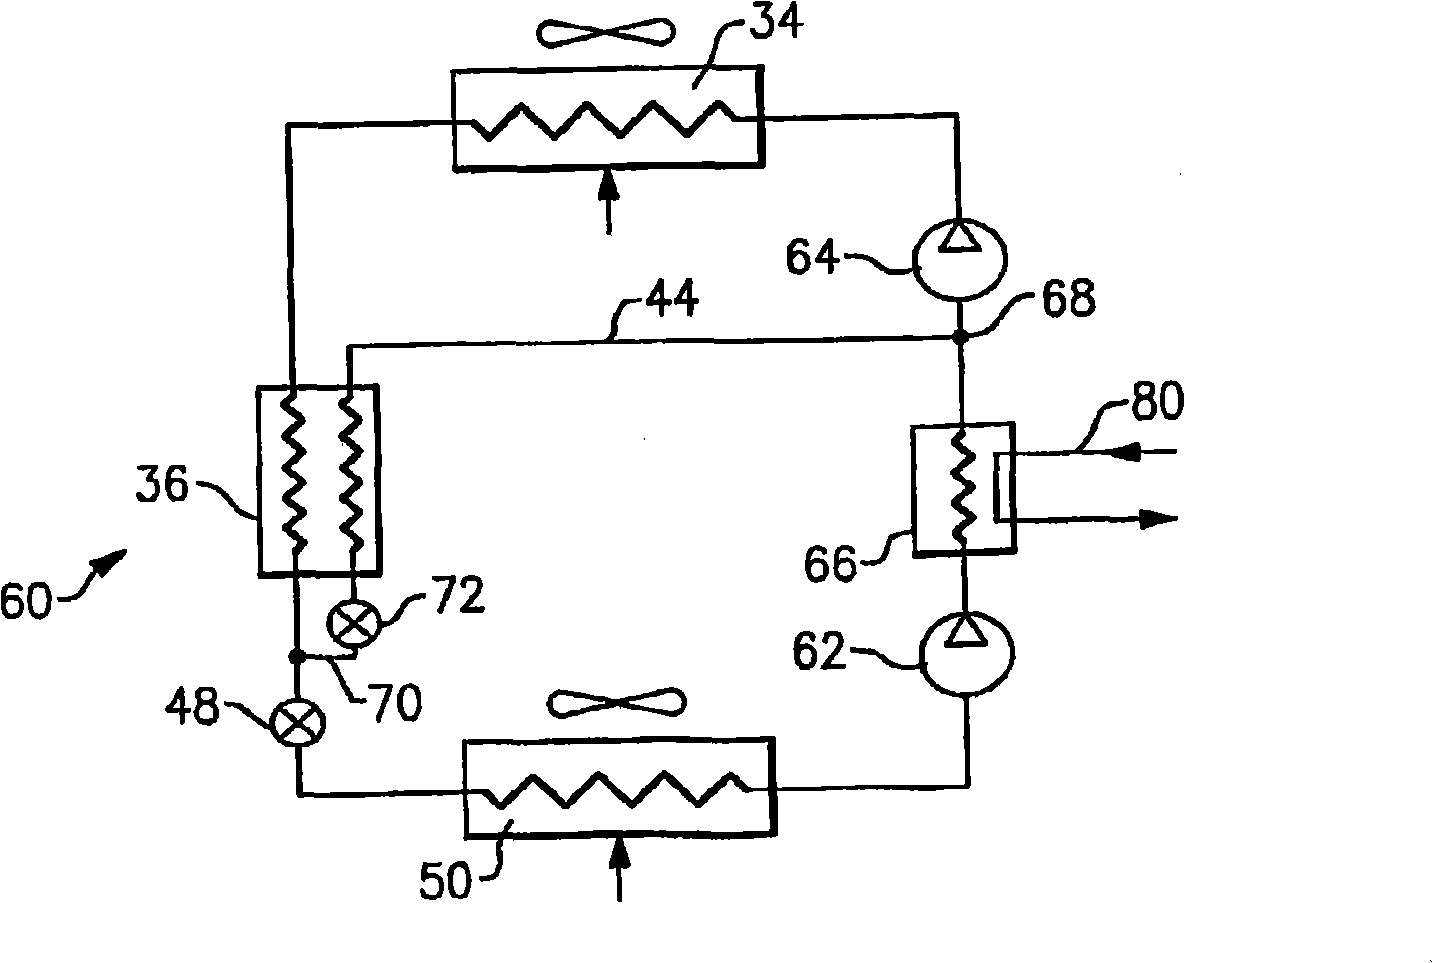 Refrigerant system with economizer, intercooler and multi-stage compressor